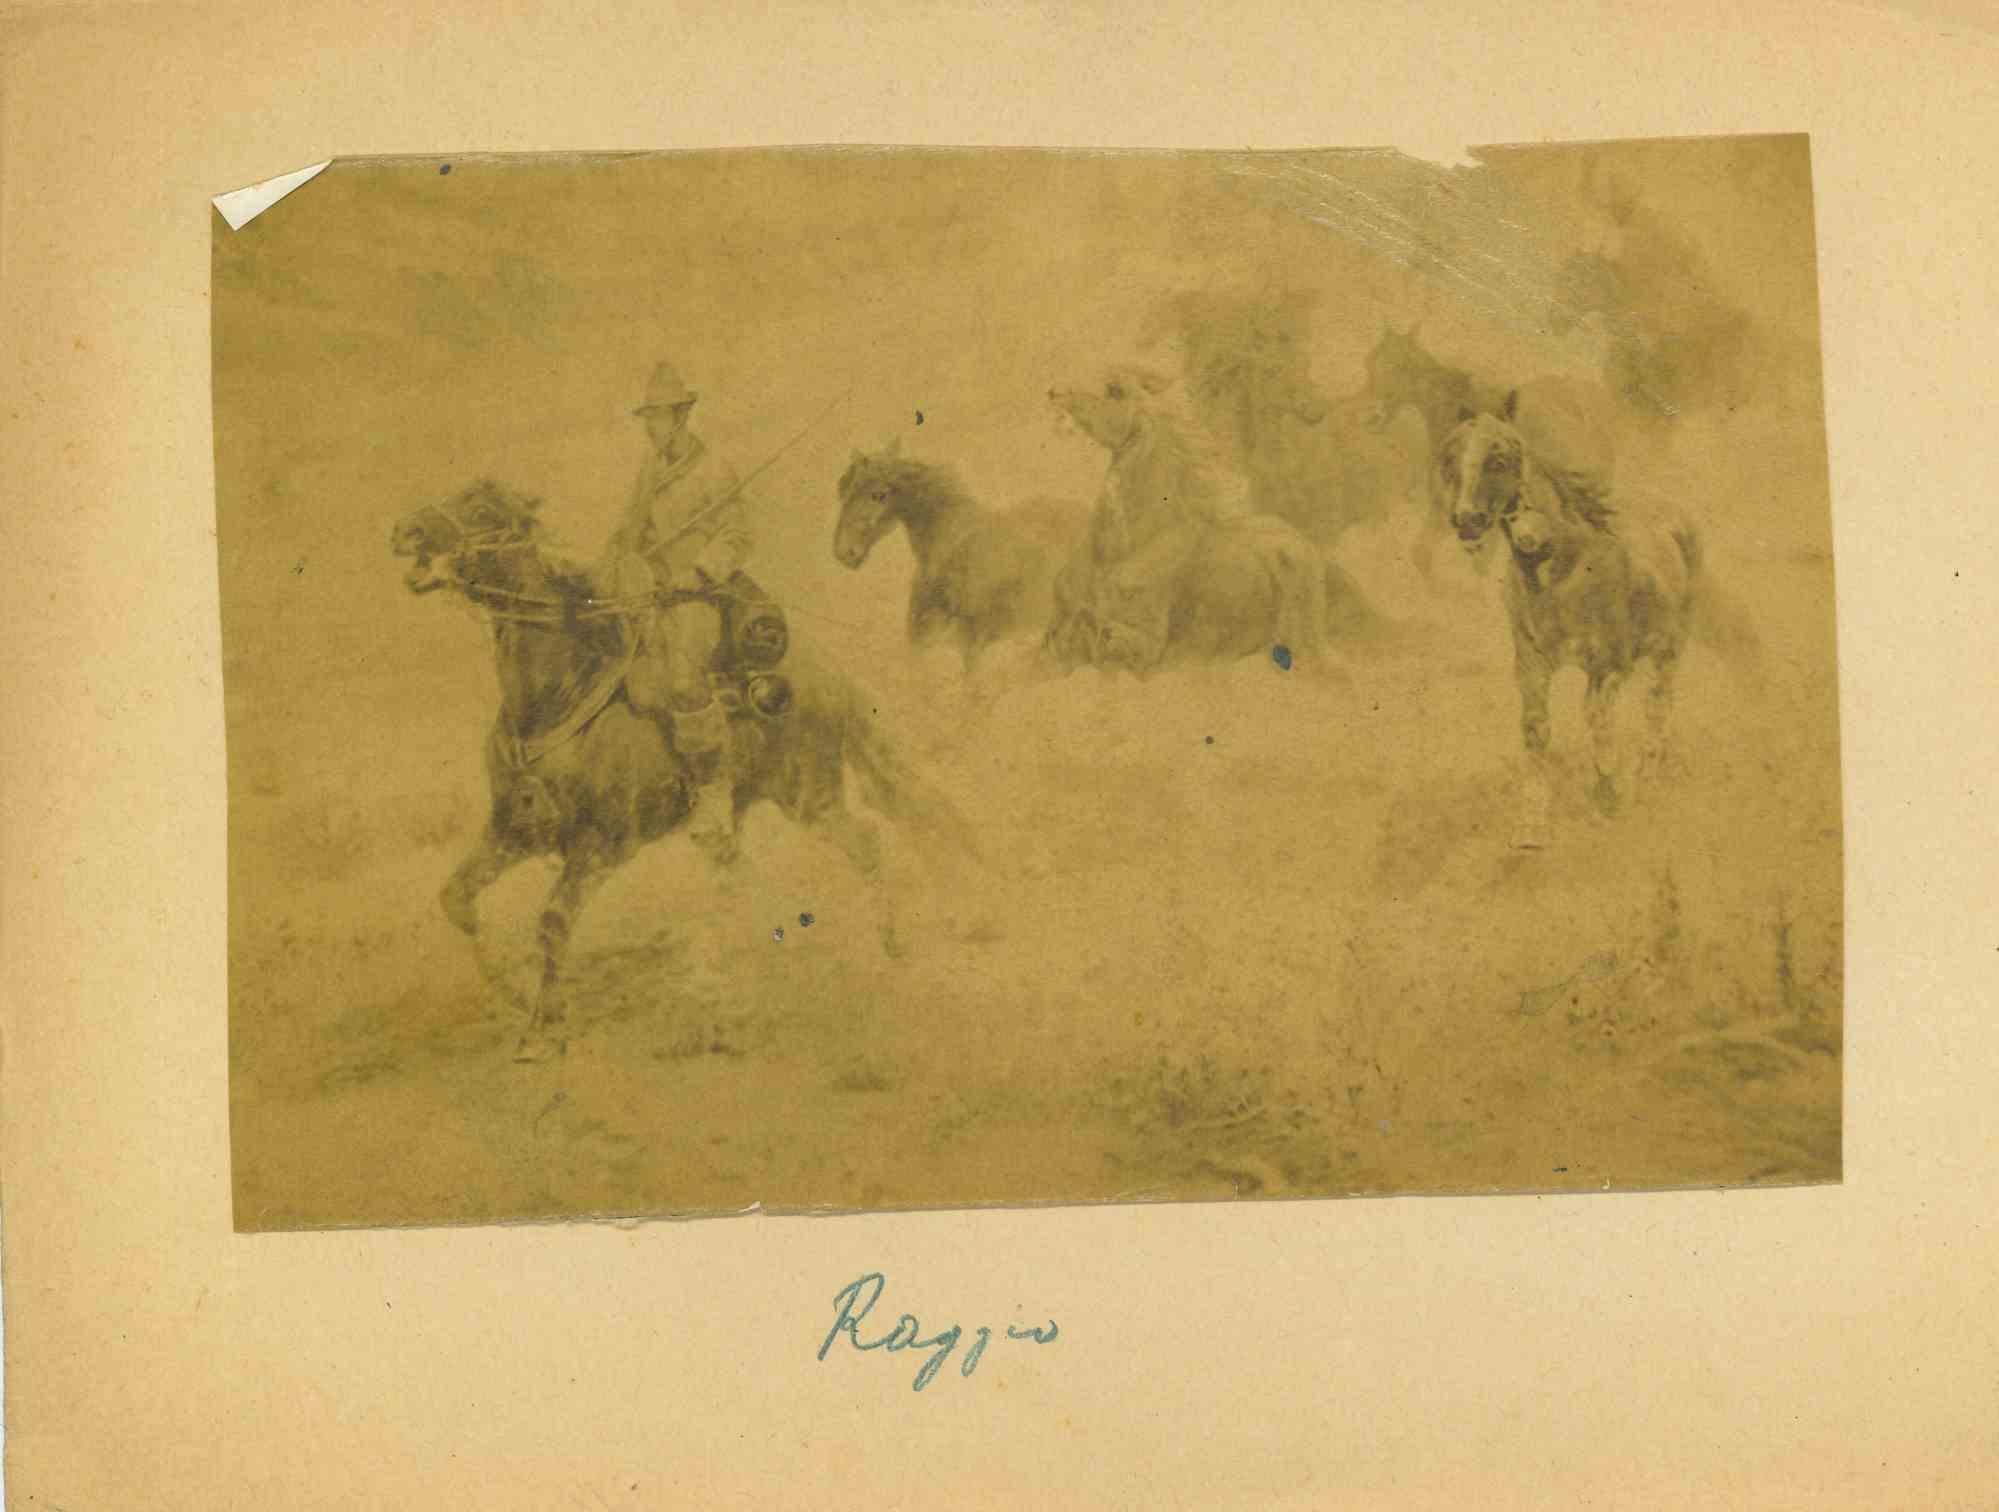 Unknown Portrait Photograph - Vintage Photo of a Painting  by Giuseppe Raggio - Riding - Early 20th Century